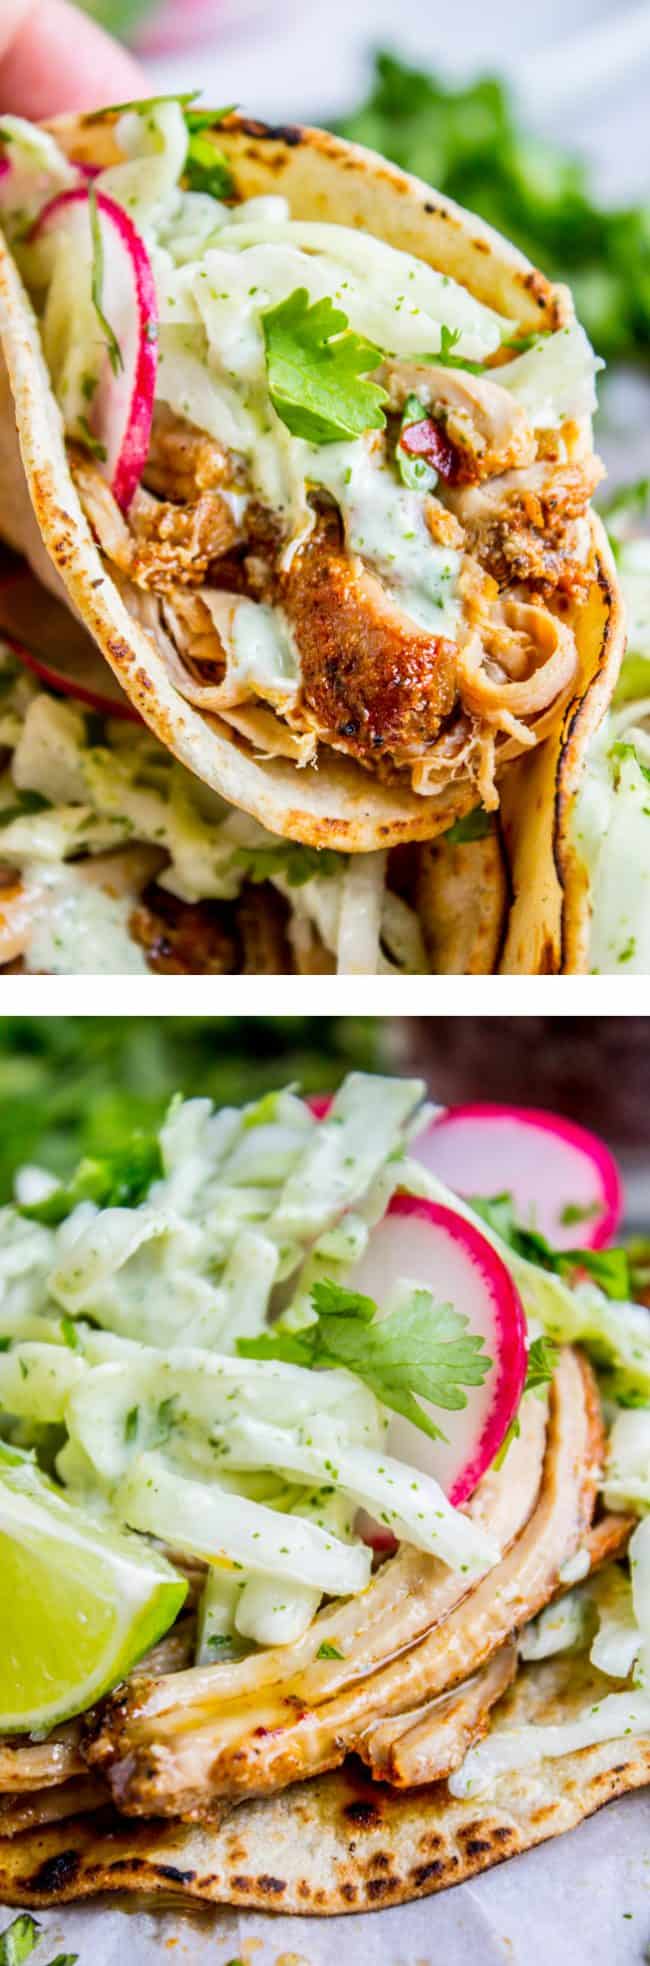 Slow Cooker Pork Tacos with Mexican Coleslaw - The Food Charlatan